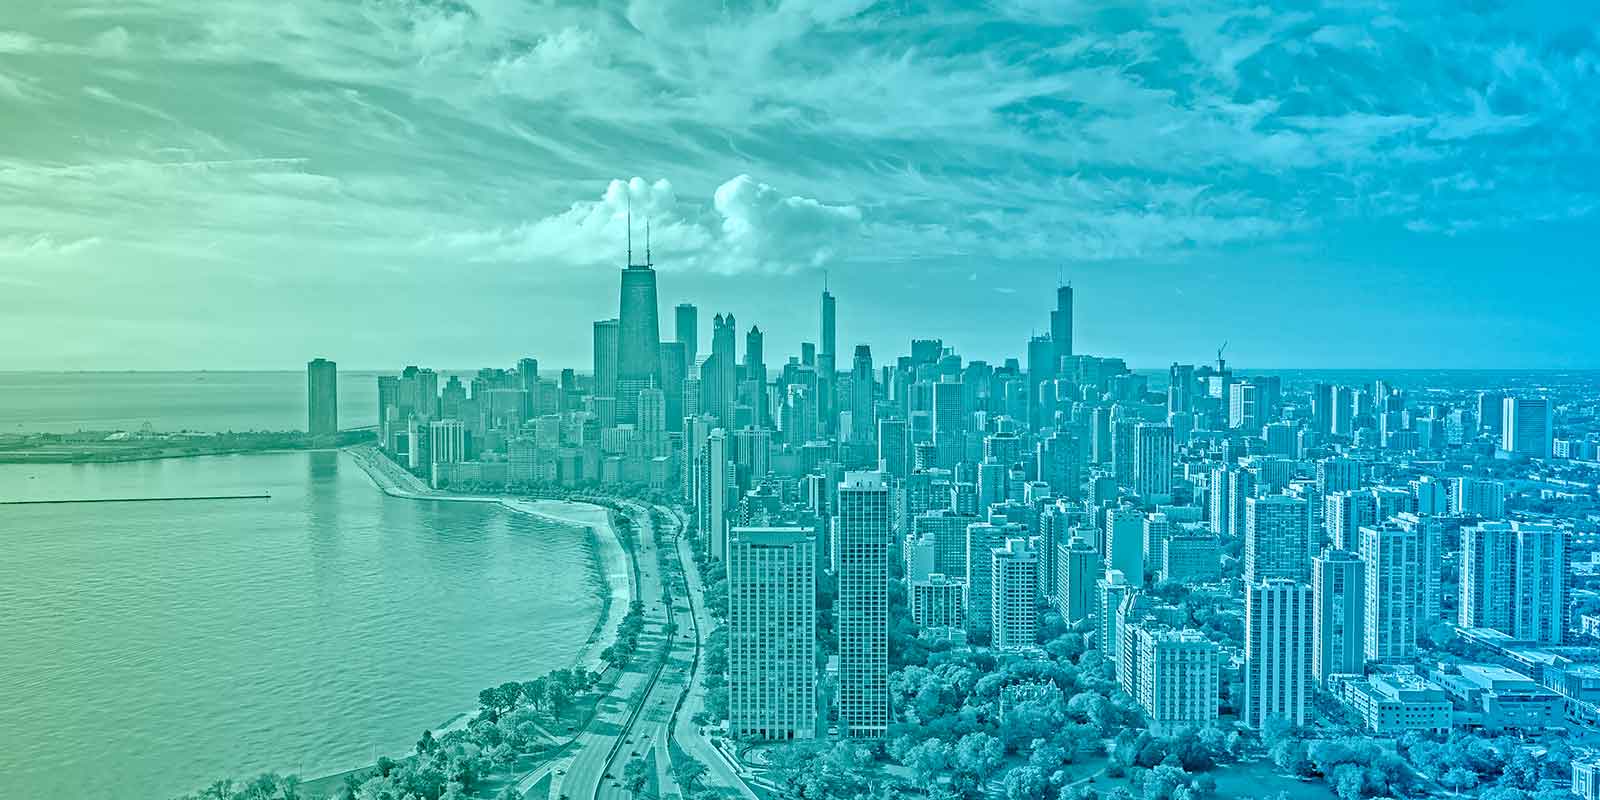 Chicago with a blue-green overlay